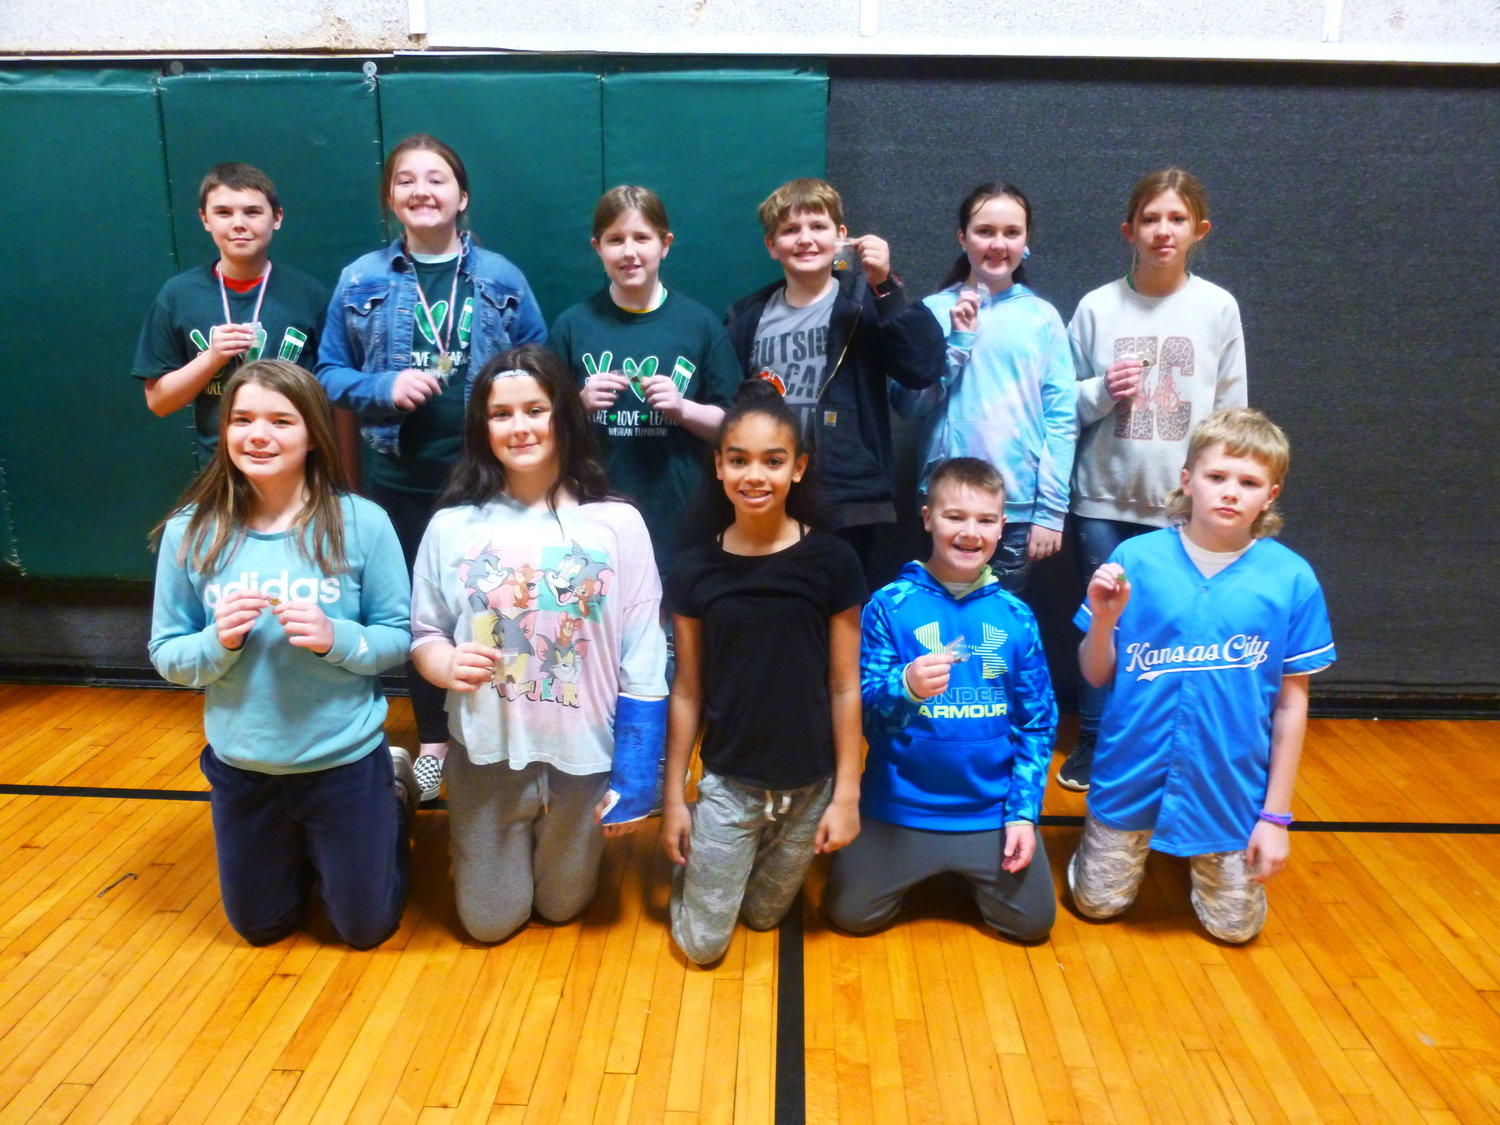  Westran Elementary announced the names of fifth grade students who made the A honor roll for the third quarter. Front row from left: Kendall Martin, Keeley Merritt, Jayda Miller-Settle, Connor Patrick and Kiptyn Payton. Back row from left: Evan Barnett, Makenna Farris, Emmalee Kertz, David Bollman, Katie Henderson and Kendrynn Fuemmeler. Not pictured: Gracie Wilkinson.